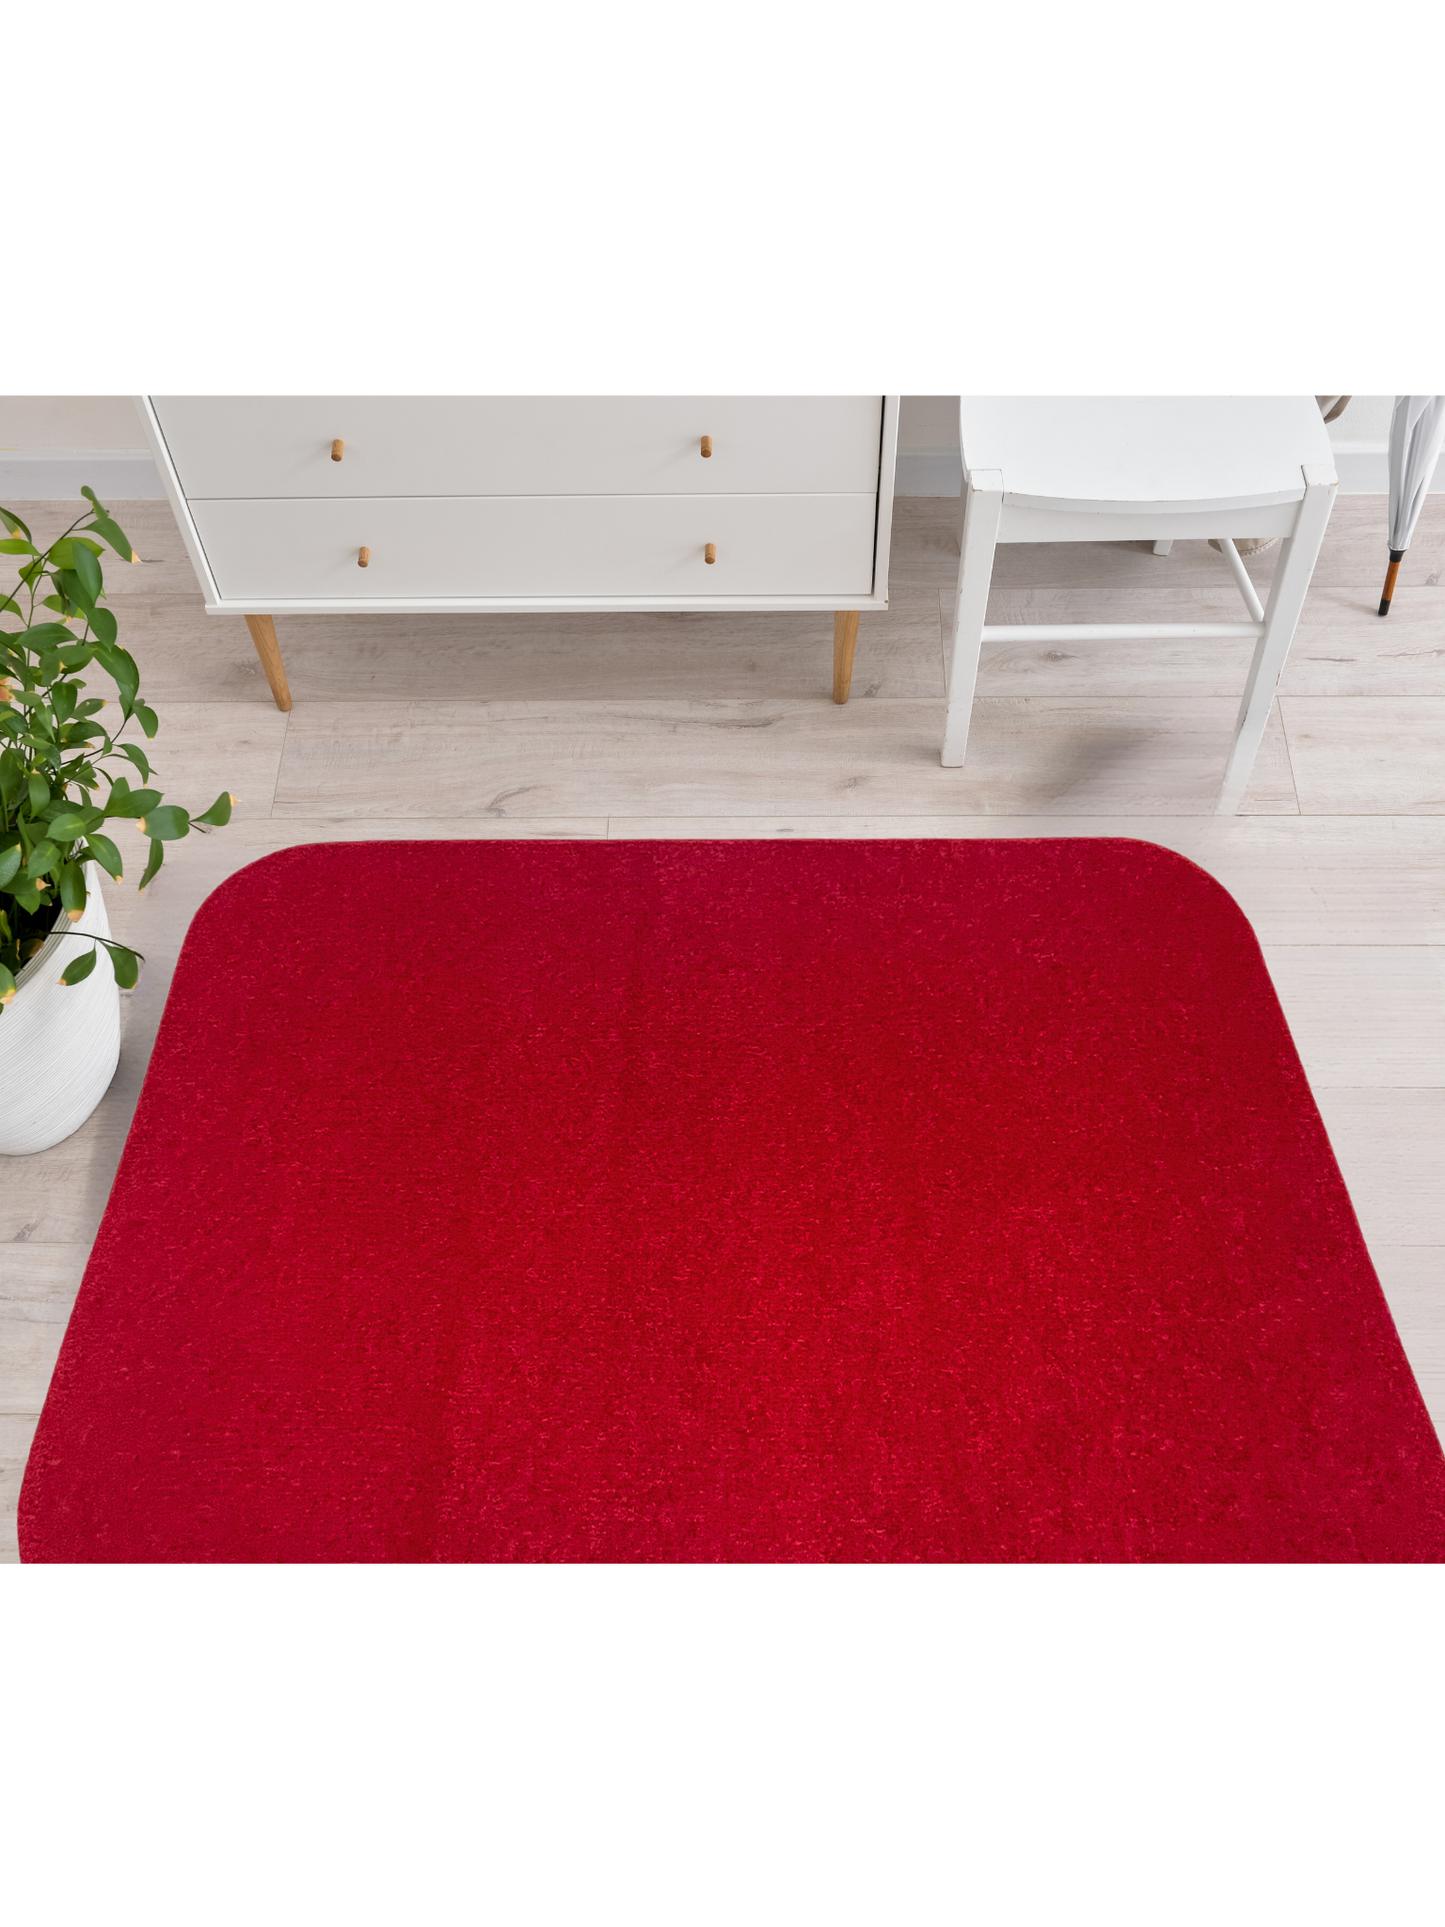 Apple Red Area Rug wiht chair and wardrobe